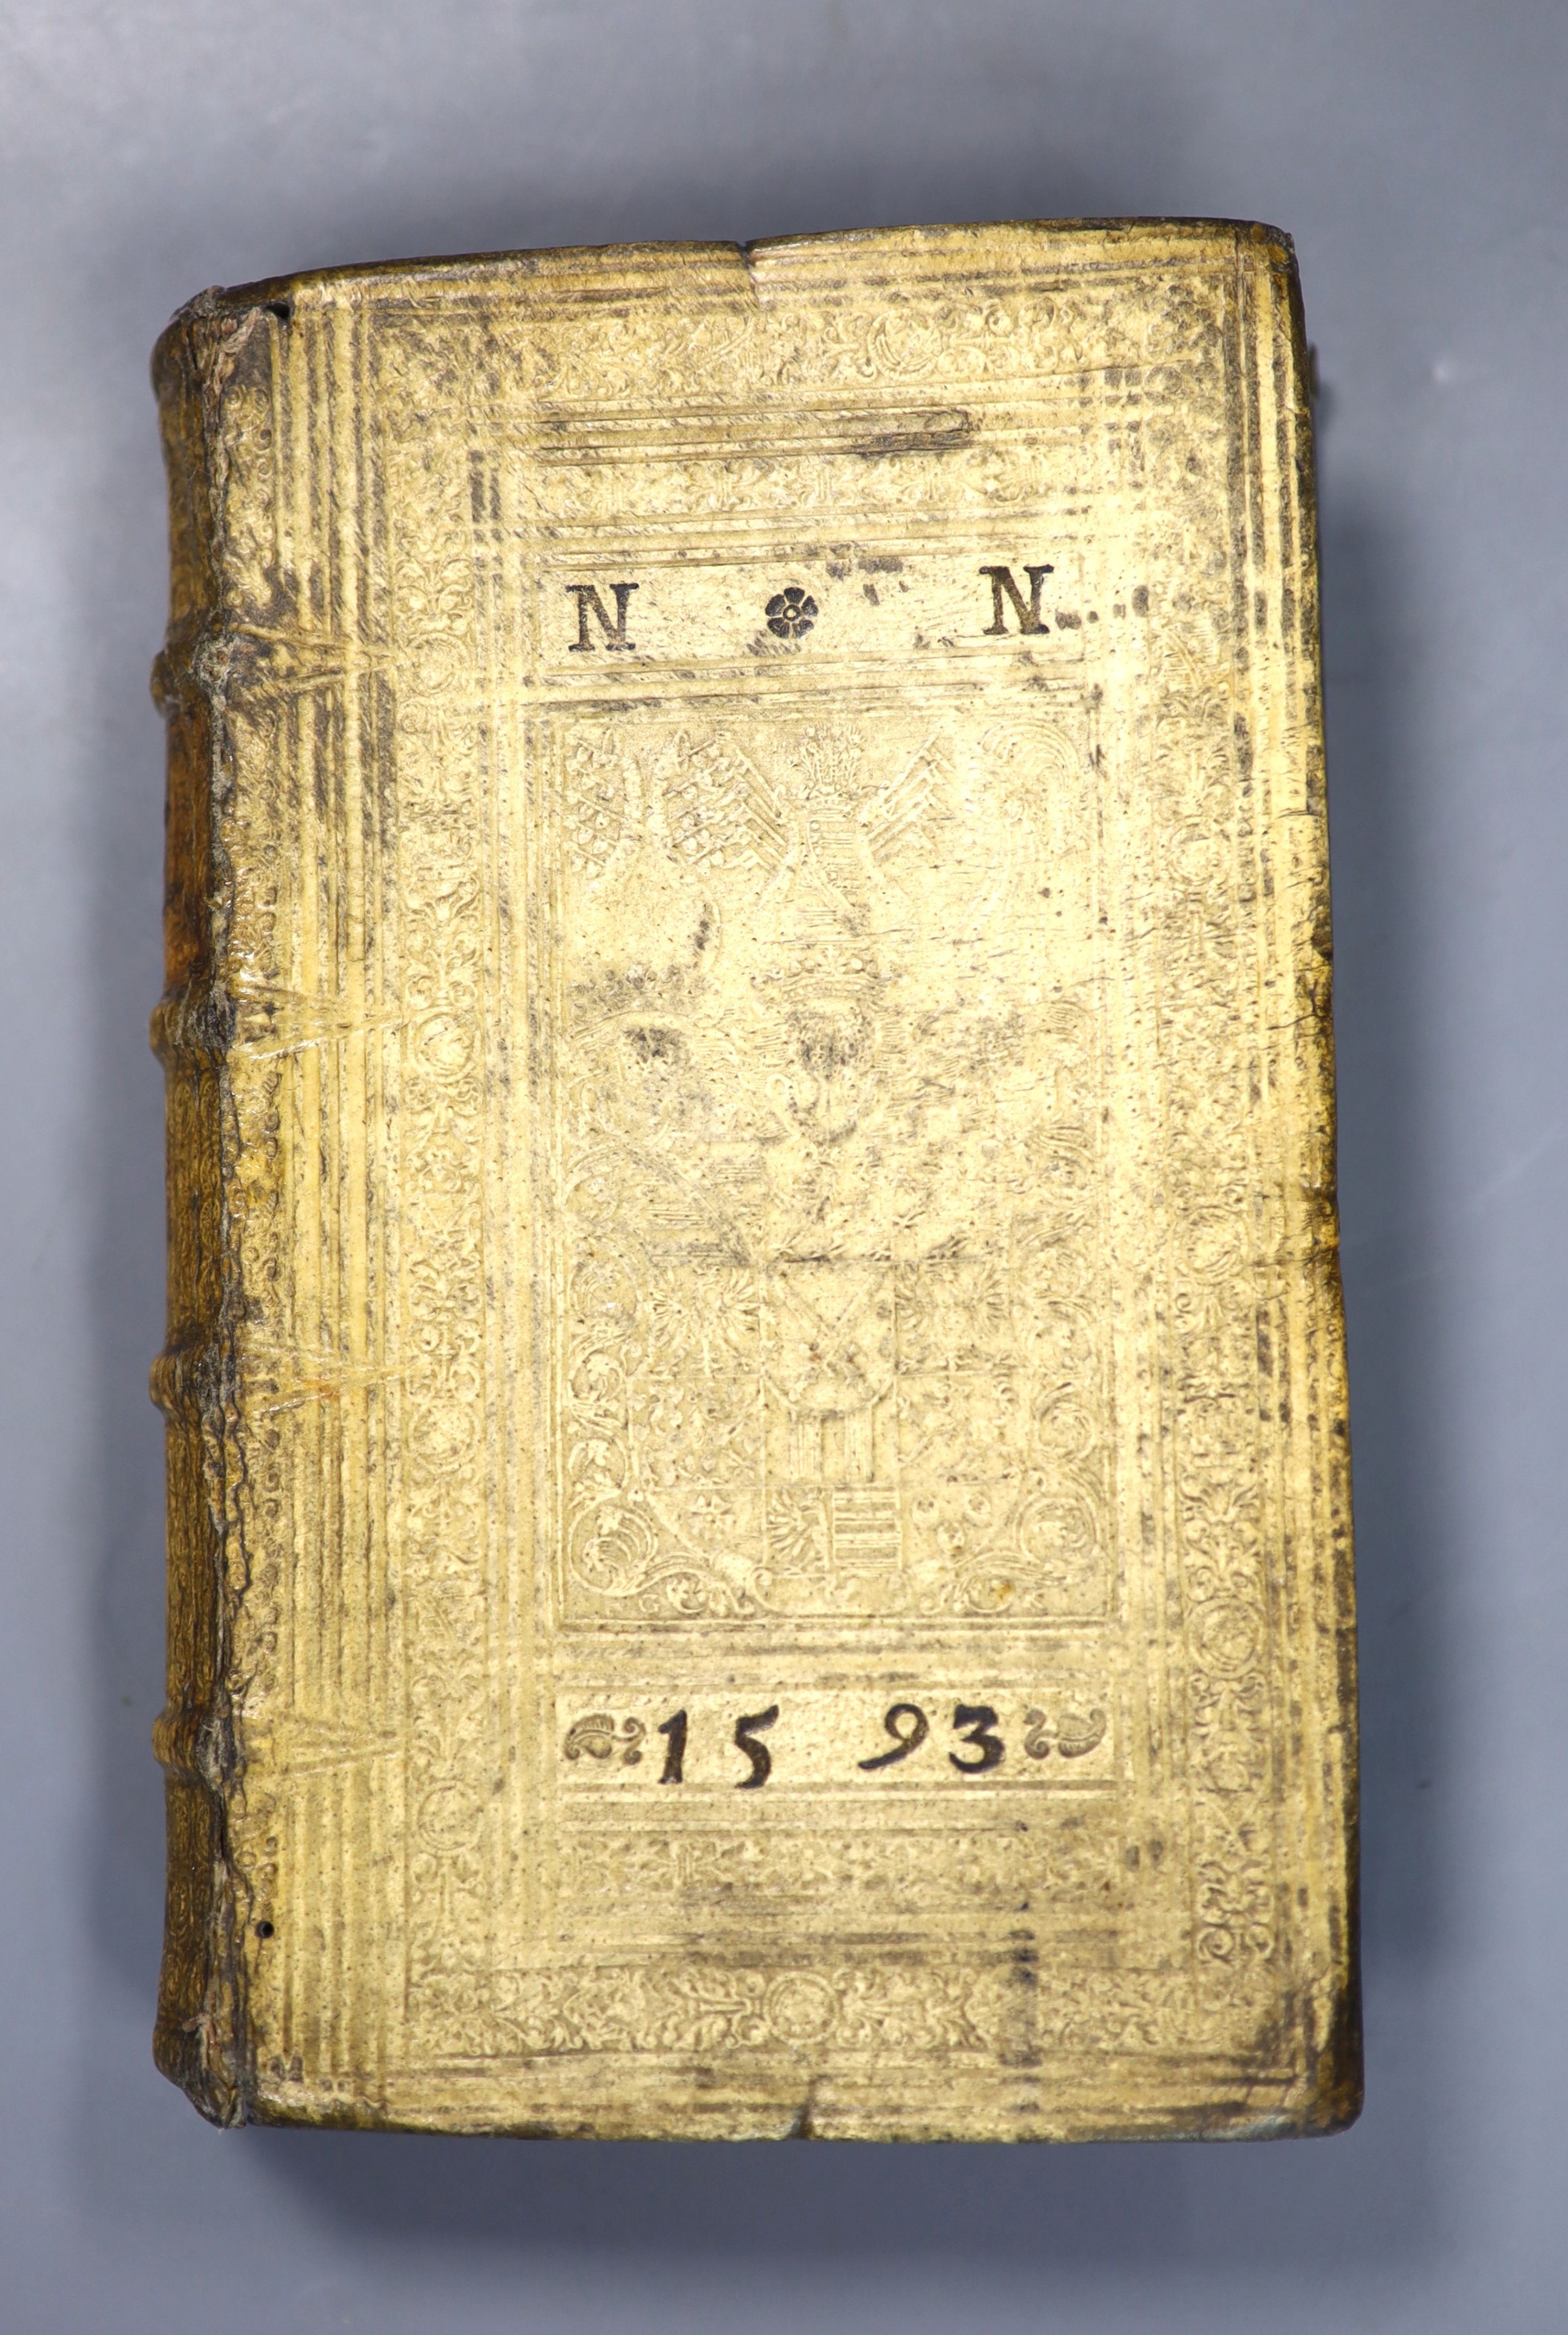 Pezelius, Christophorus - Argumentorum Philippicorum.....pars ultima, 8vo, vellum, blind-stamped with a coat of arms to covers, monogrammed and dated 1593, the red stain edges gauffered gilt and blind with a fleur de lys